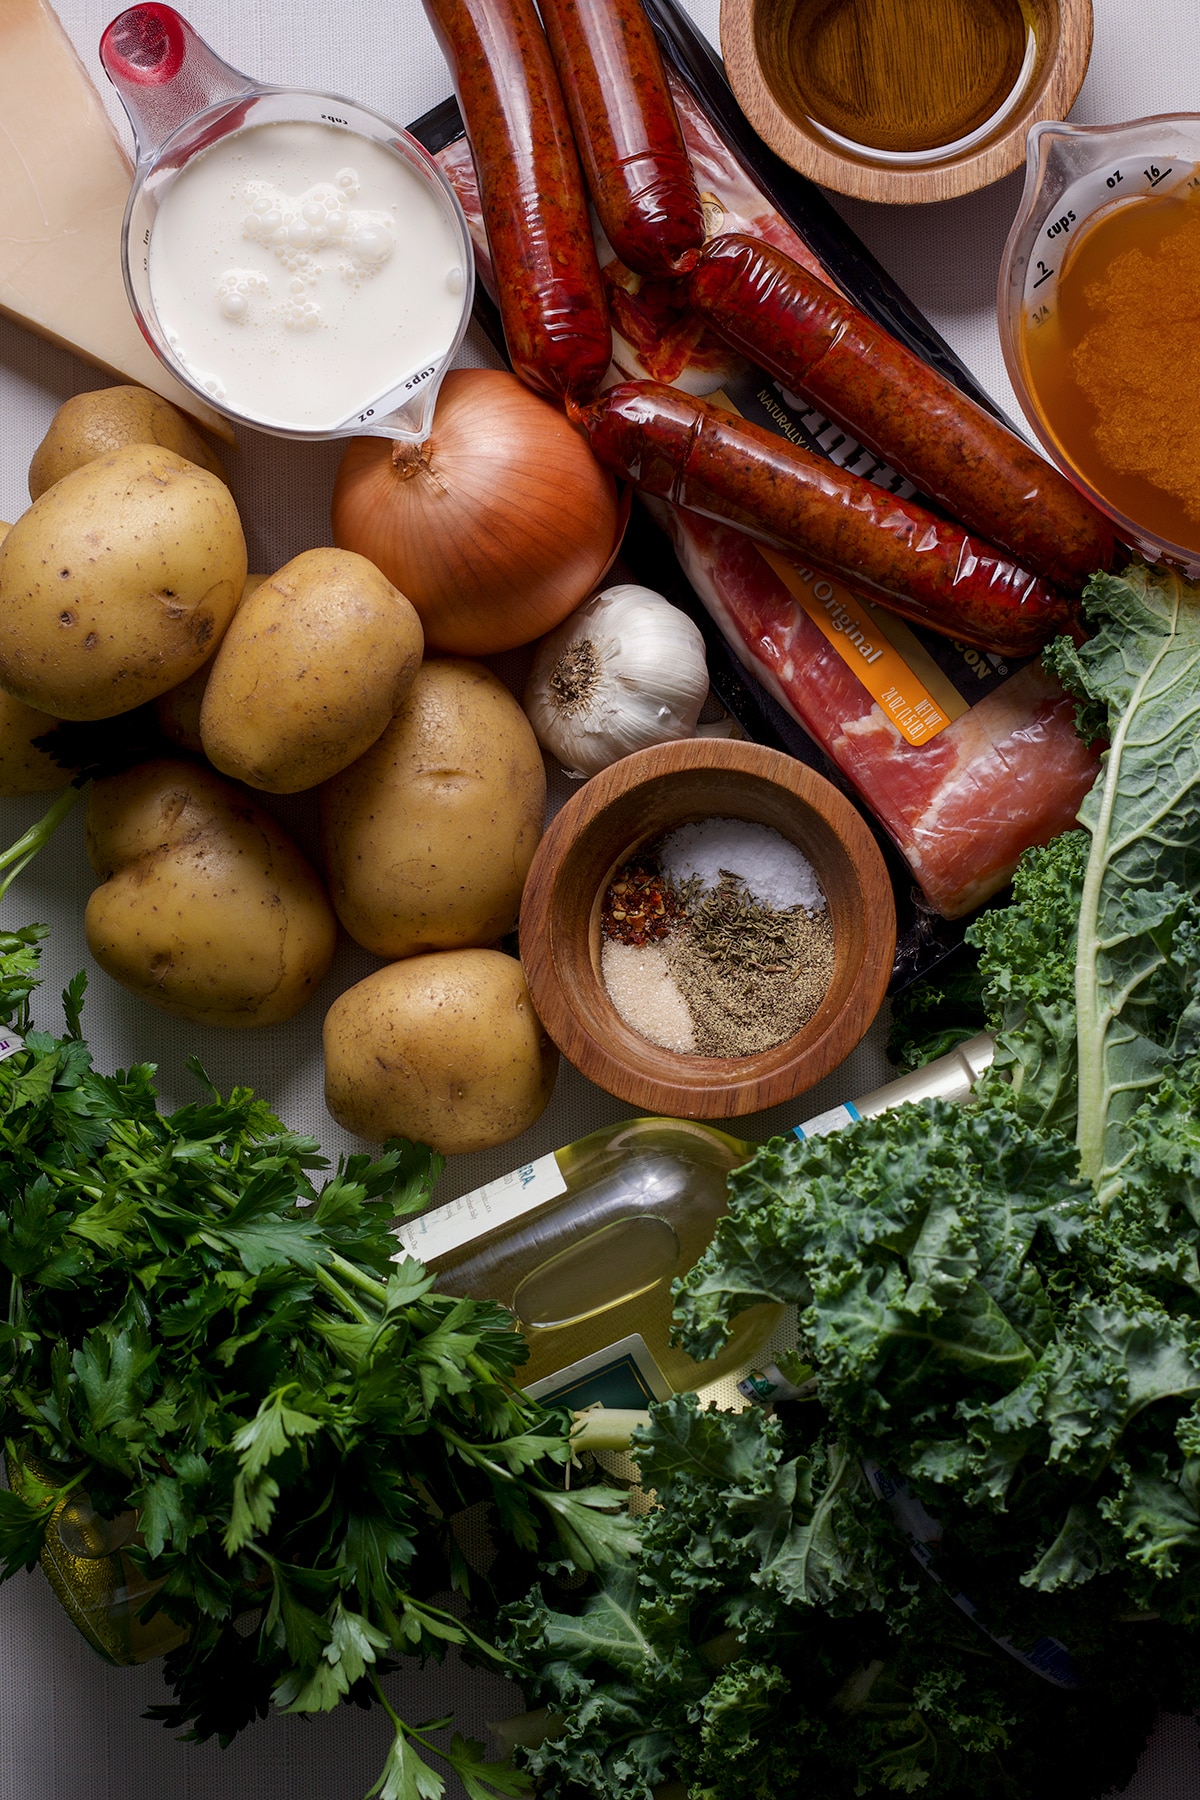 All the ingredients needed to prepare Zuppa Toscana.